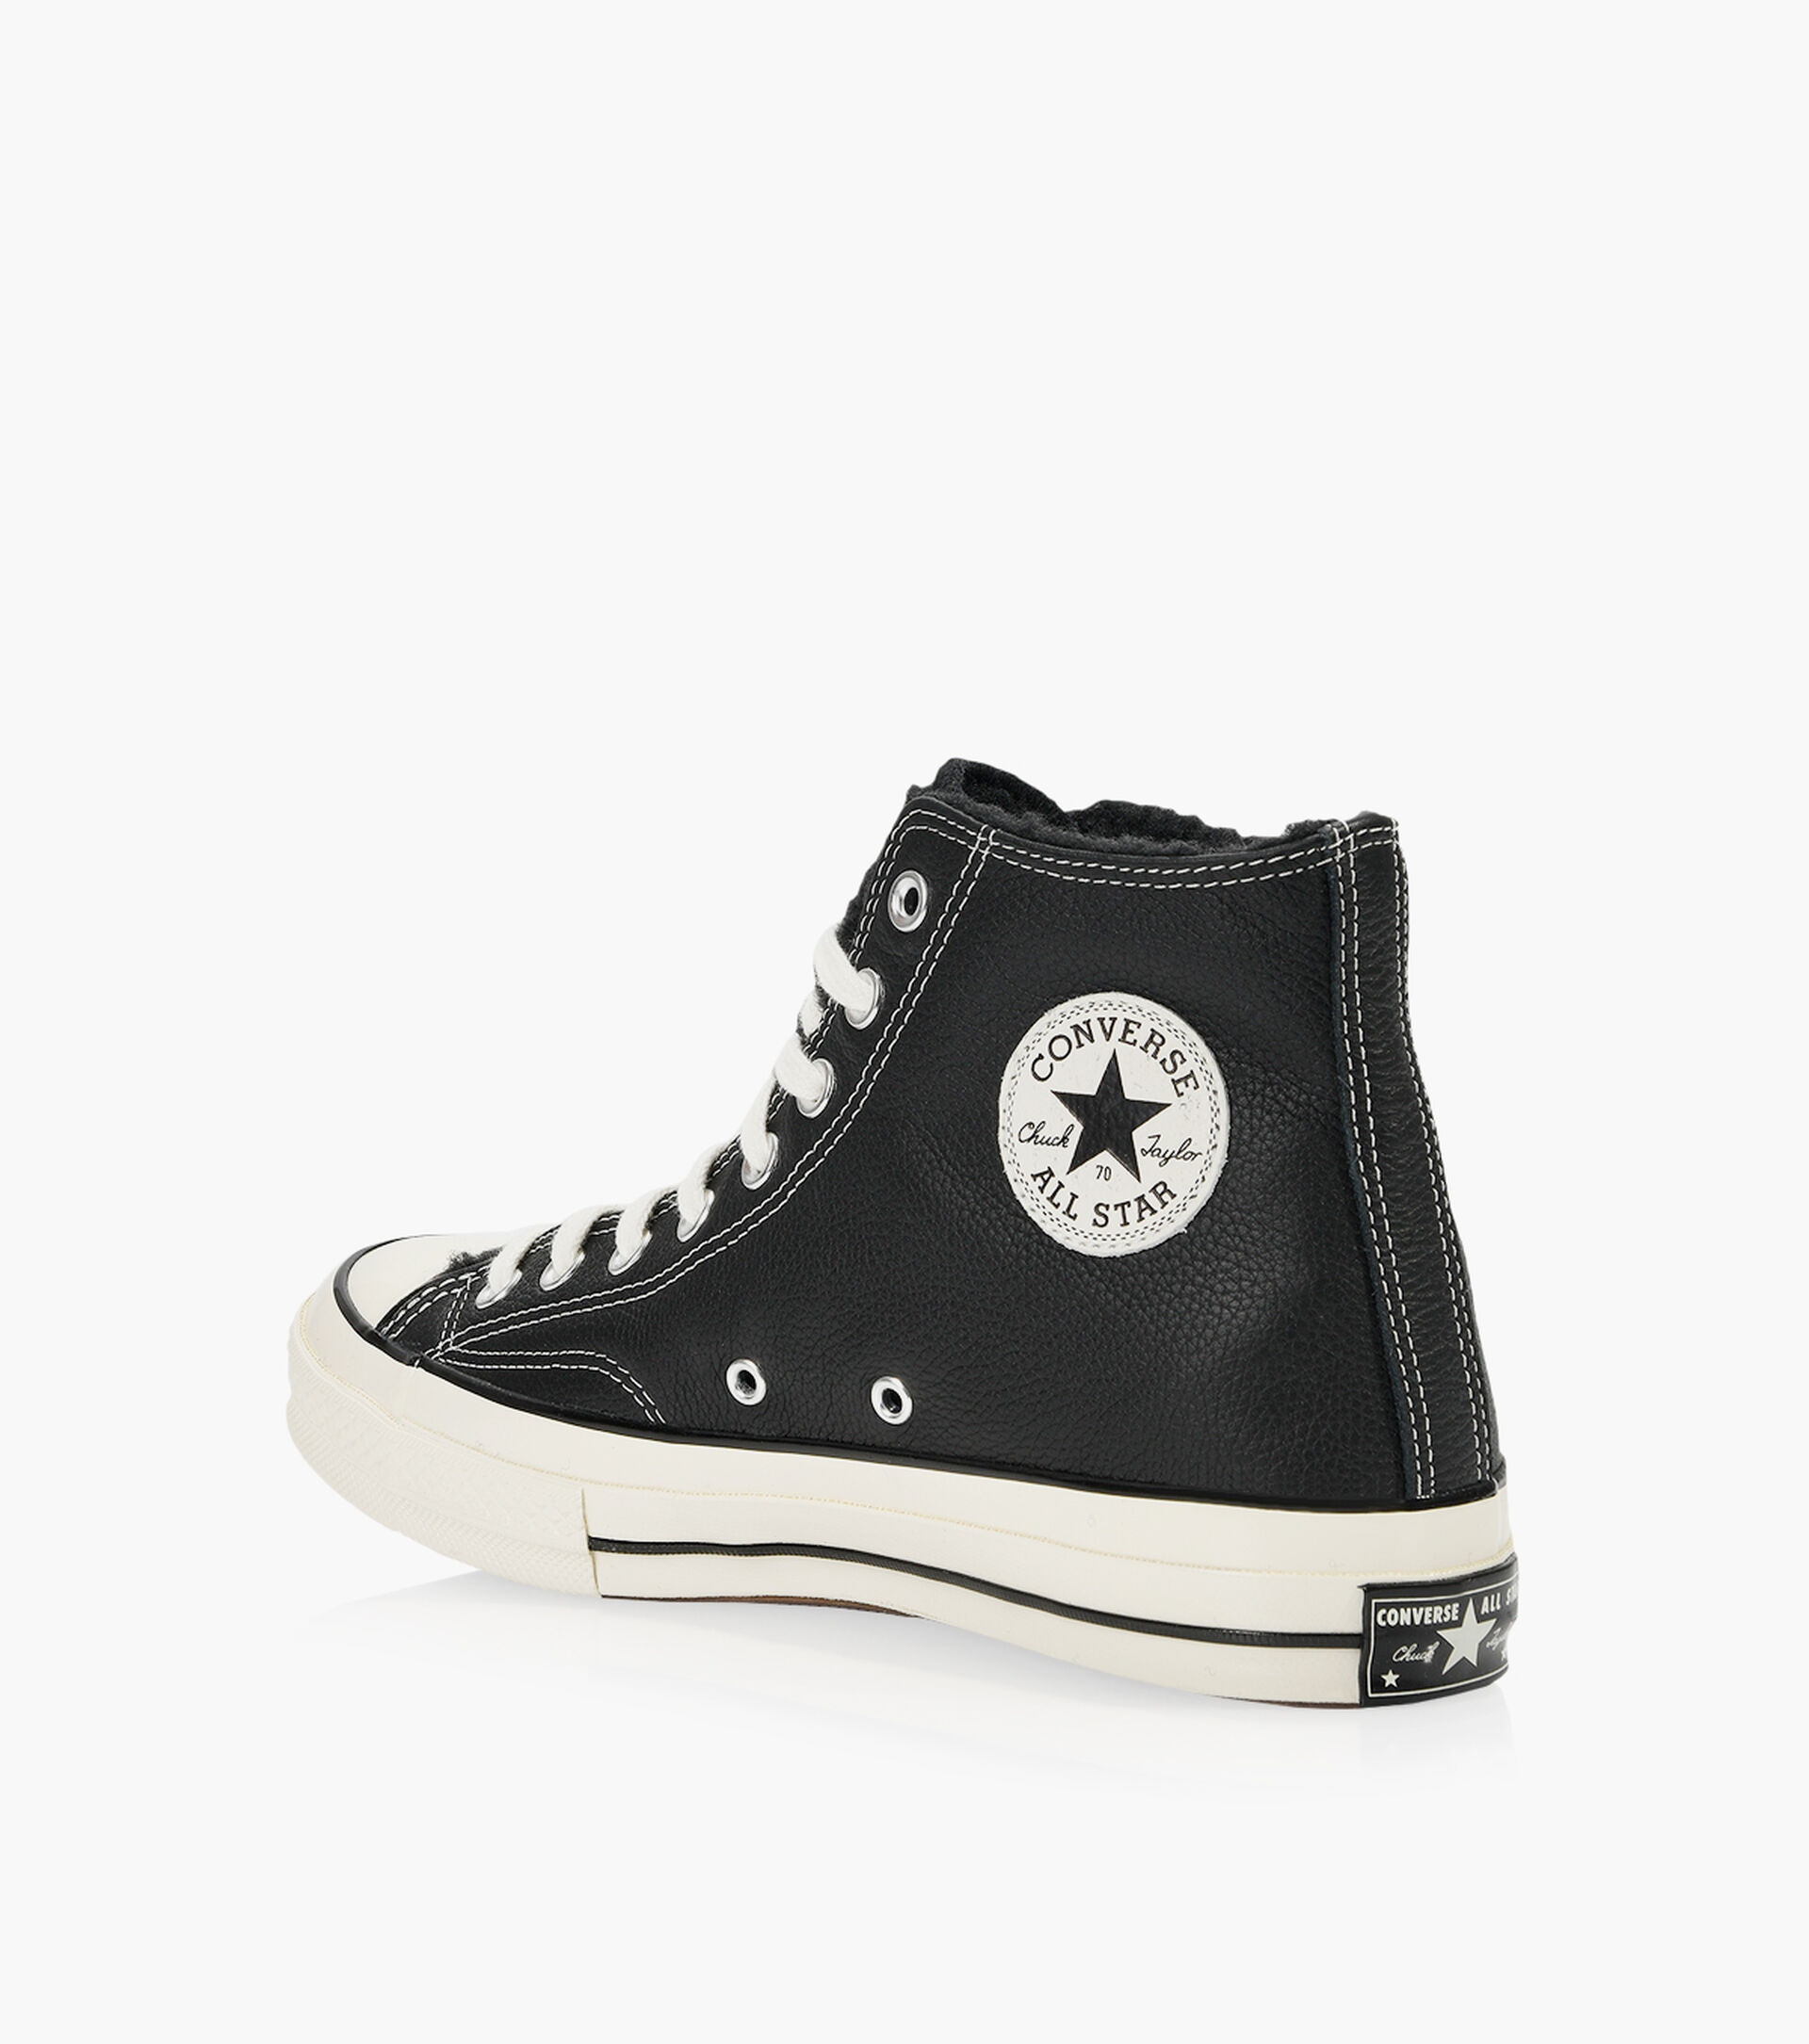 CONVERSE CHUCK 70 SHERPA LINED - Black Fabric | Browns Shoes